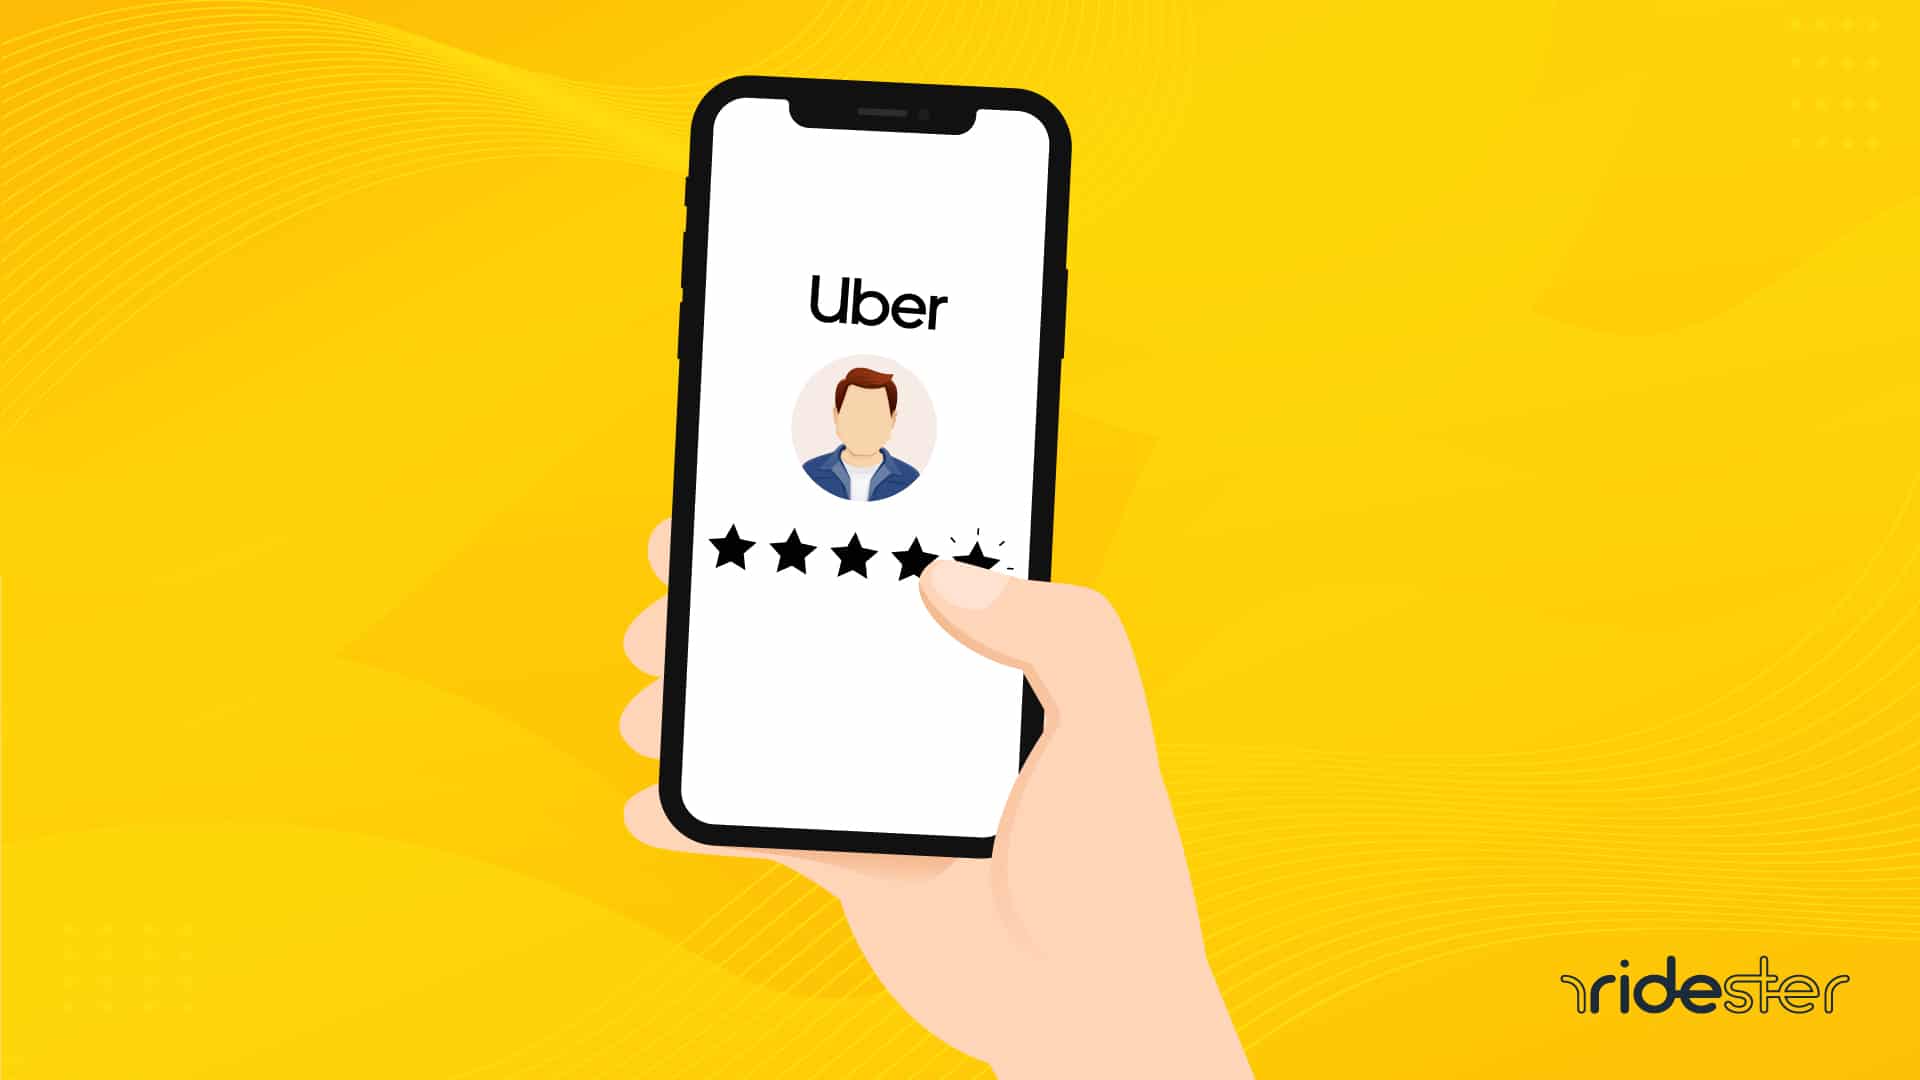 vector graphic of a hand holding a phone and showing Uber rider ratings on the screen